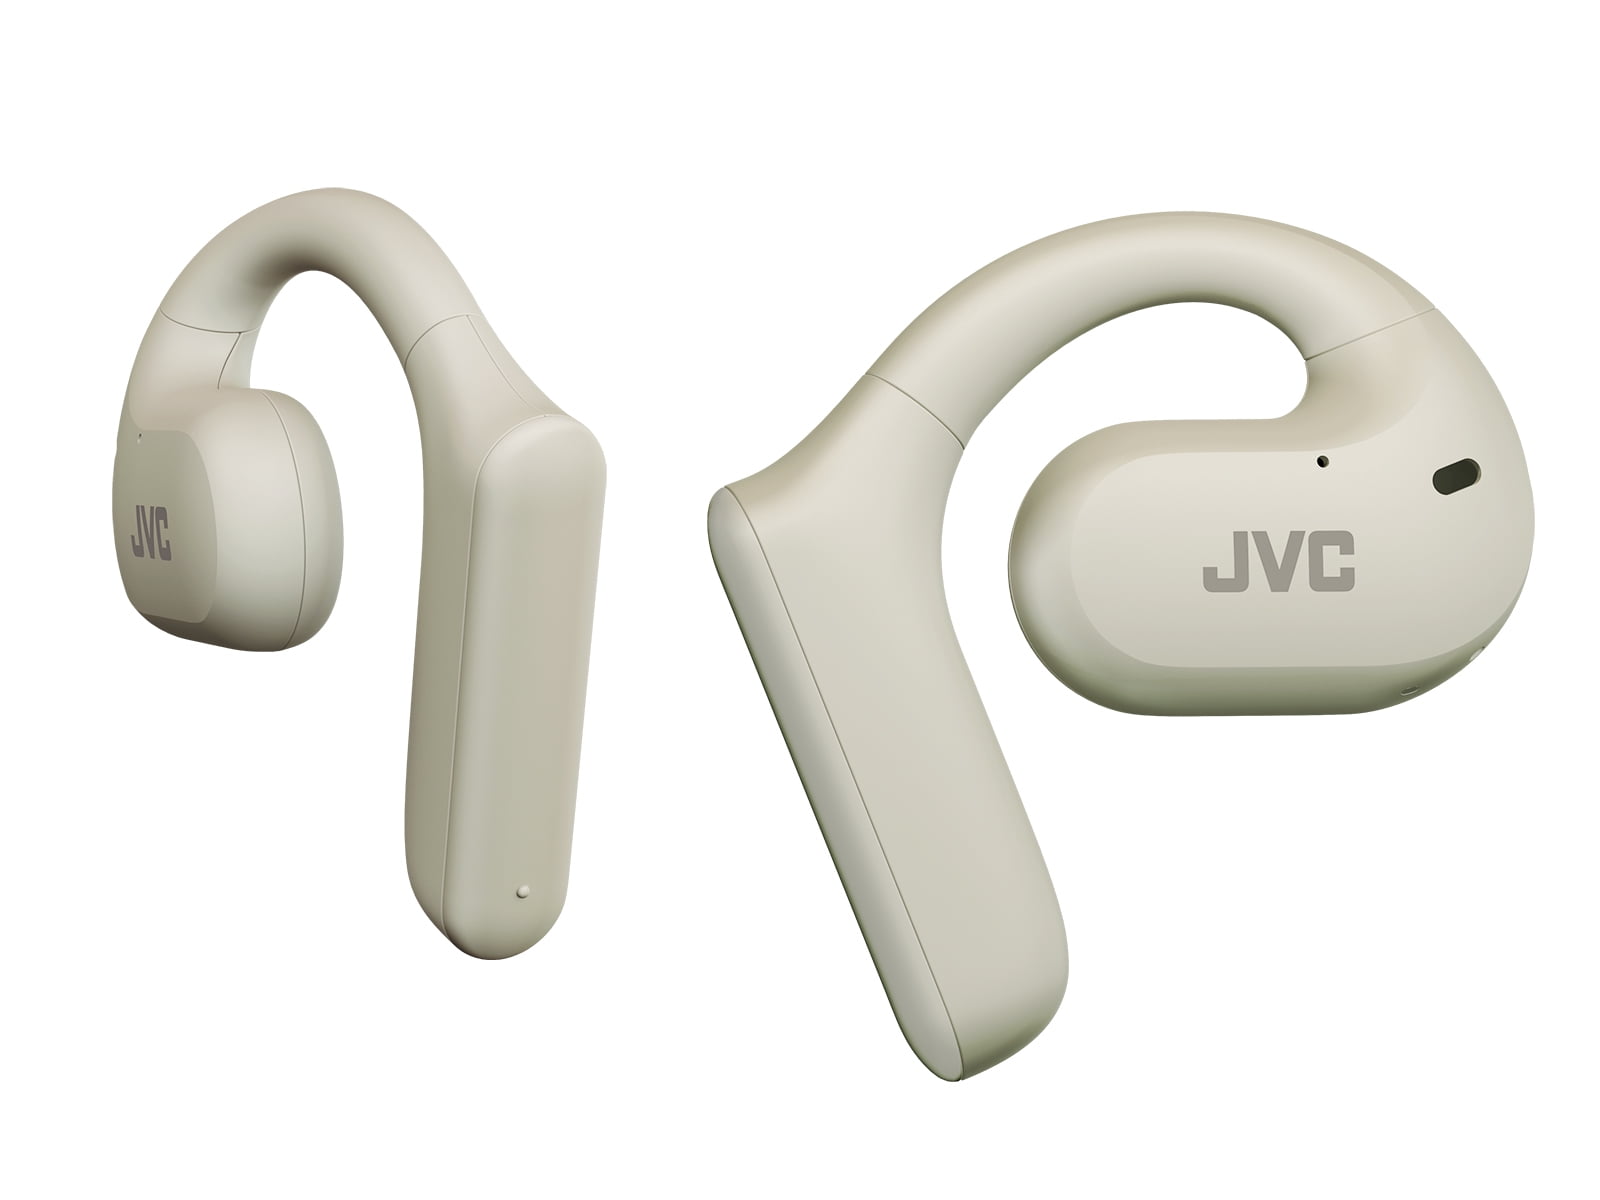 JVC Nearphones Open Ear True Wireless Headphones with 16mm Large Drivers  for Powerful Sound, Single Ear use, and Long Battery Life (up to 17 Hours)  